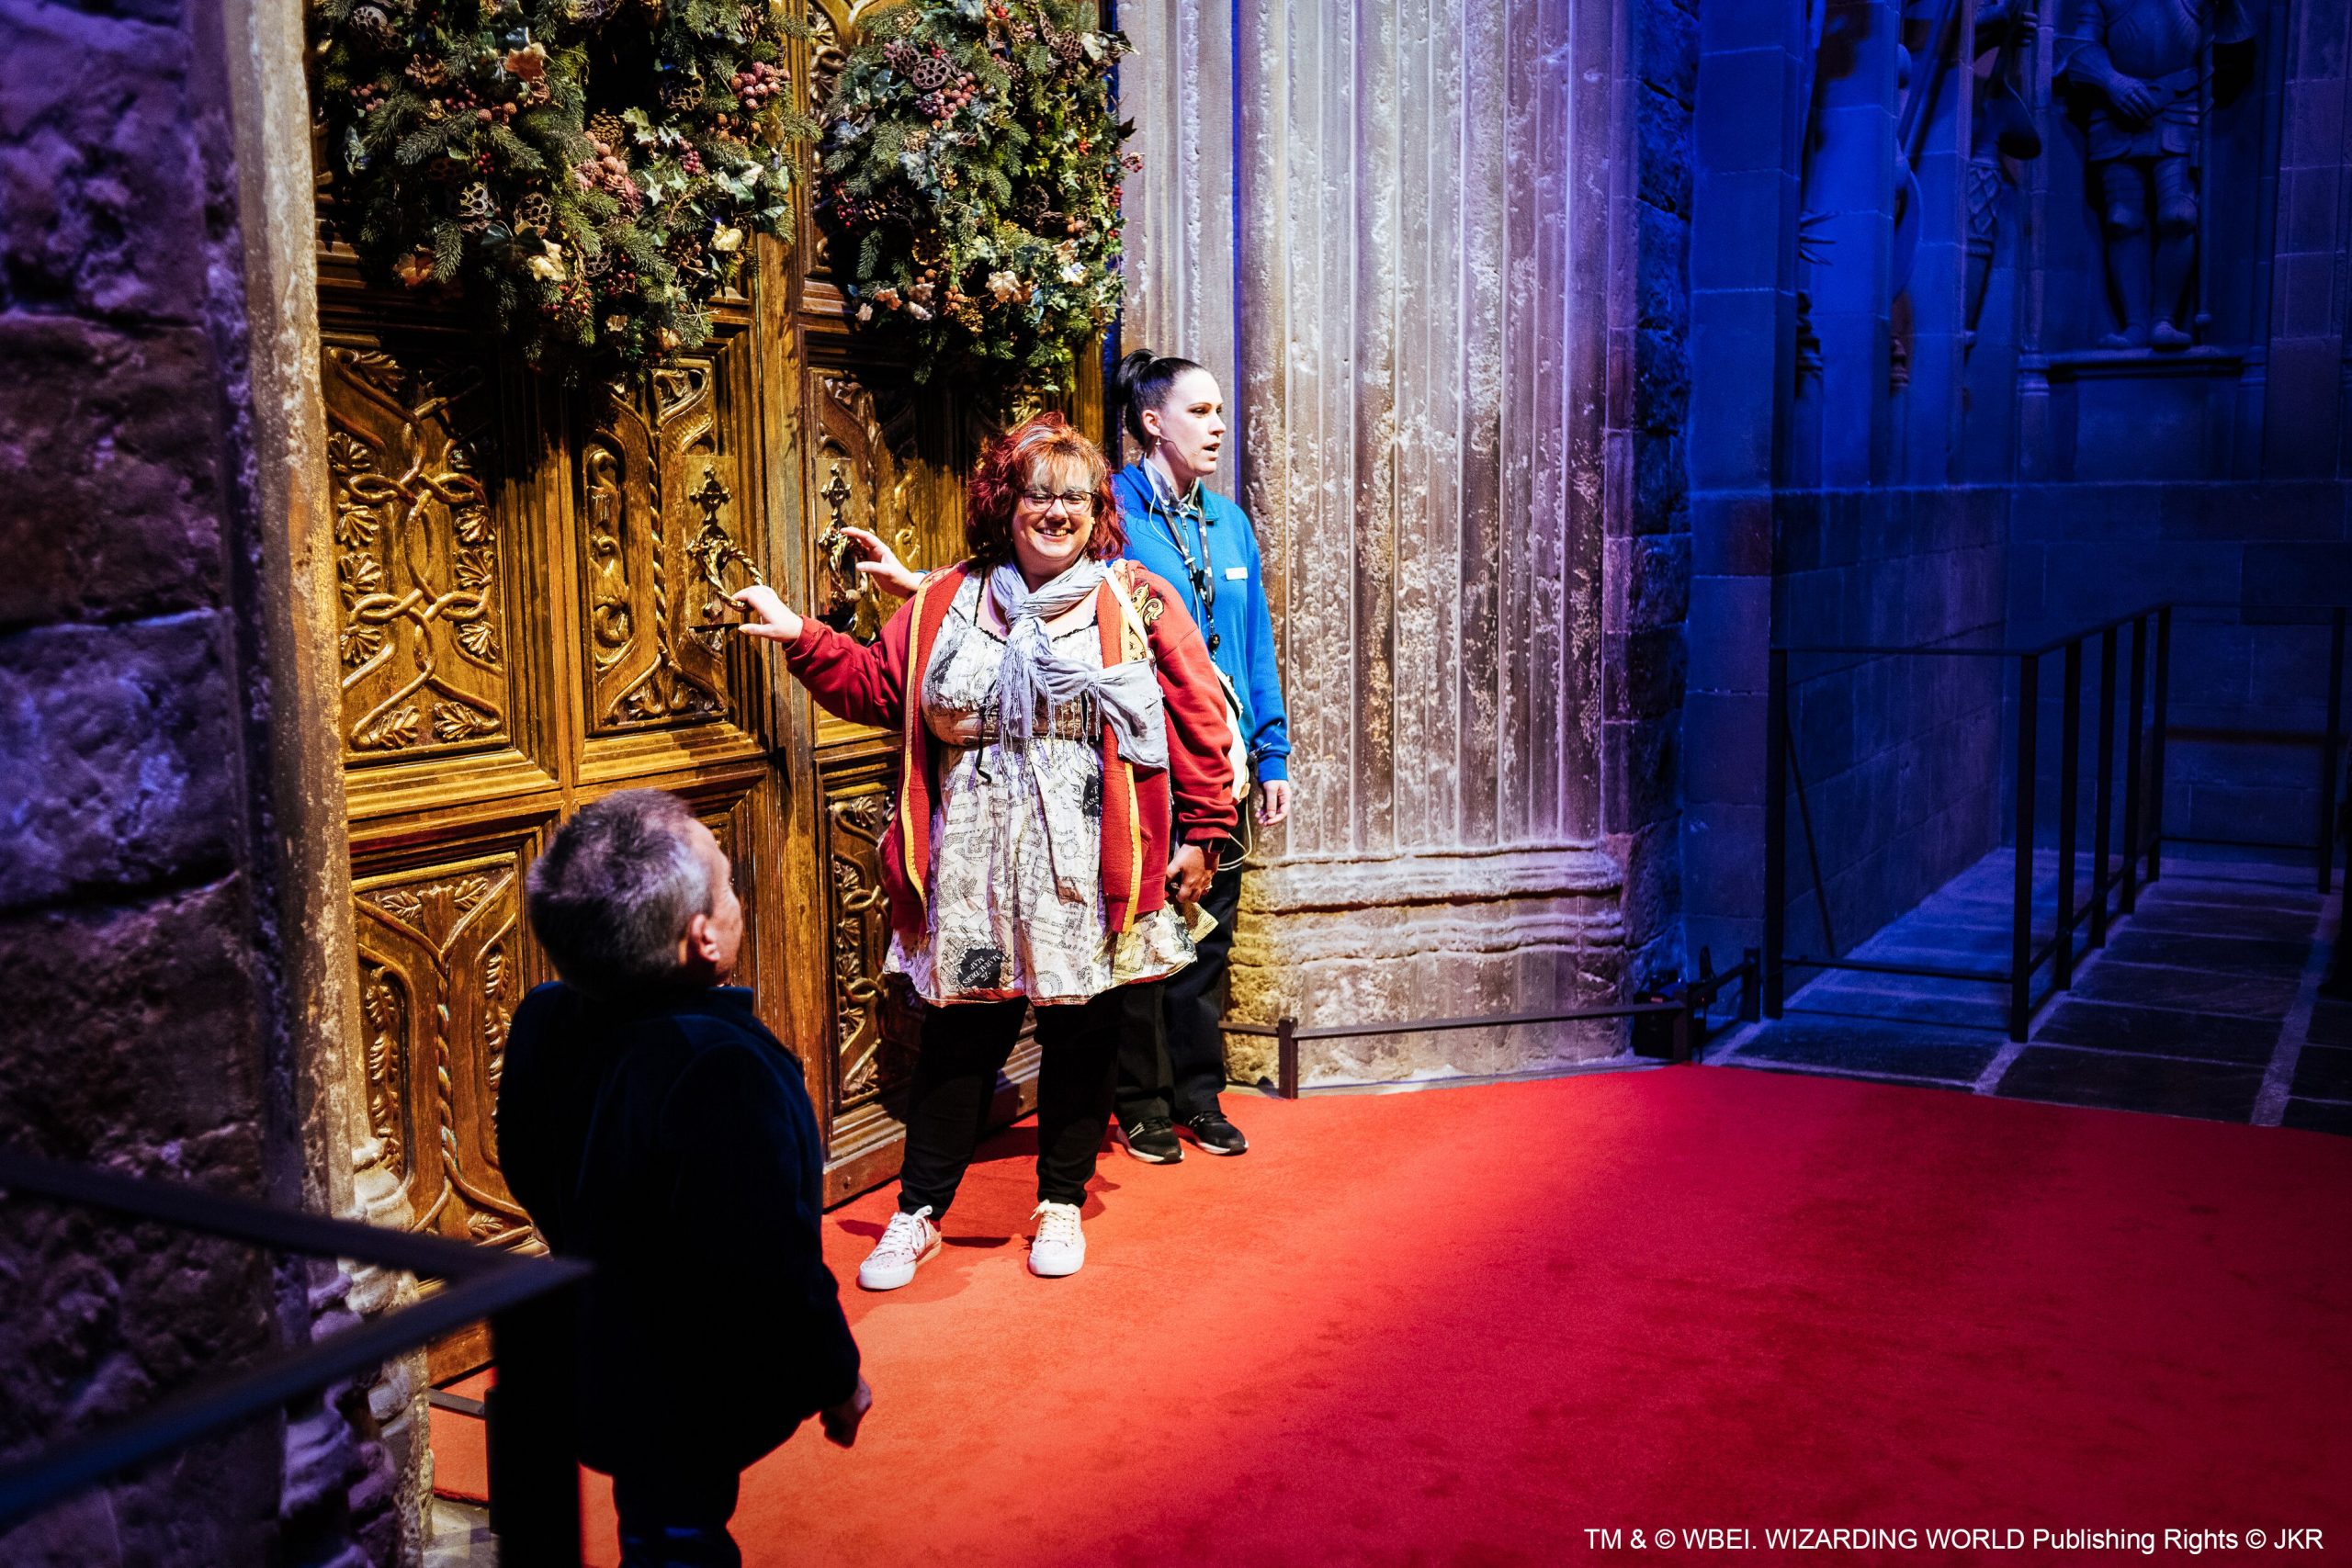 The tour and event began as all Warner Bros. Studio Tours begin, with the opening of the doors of the Great Hall!